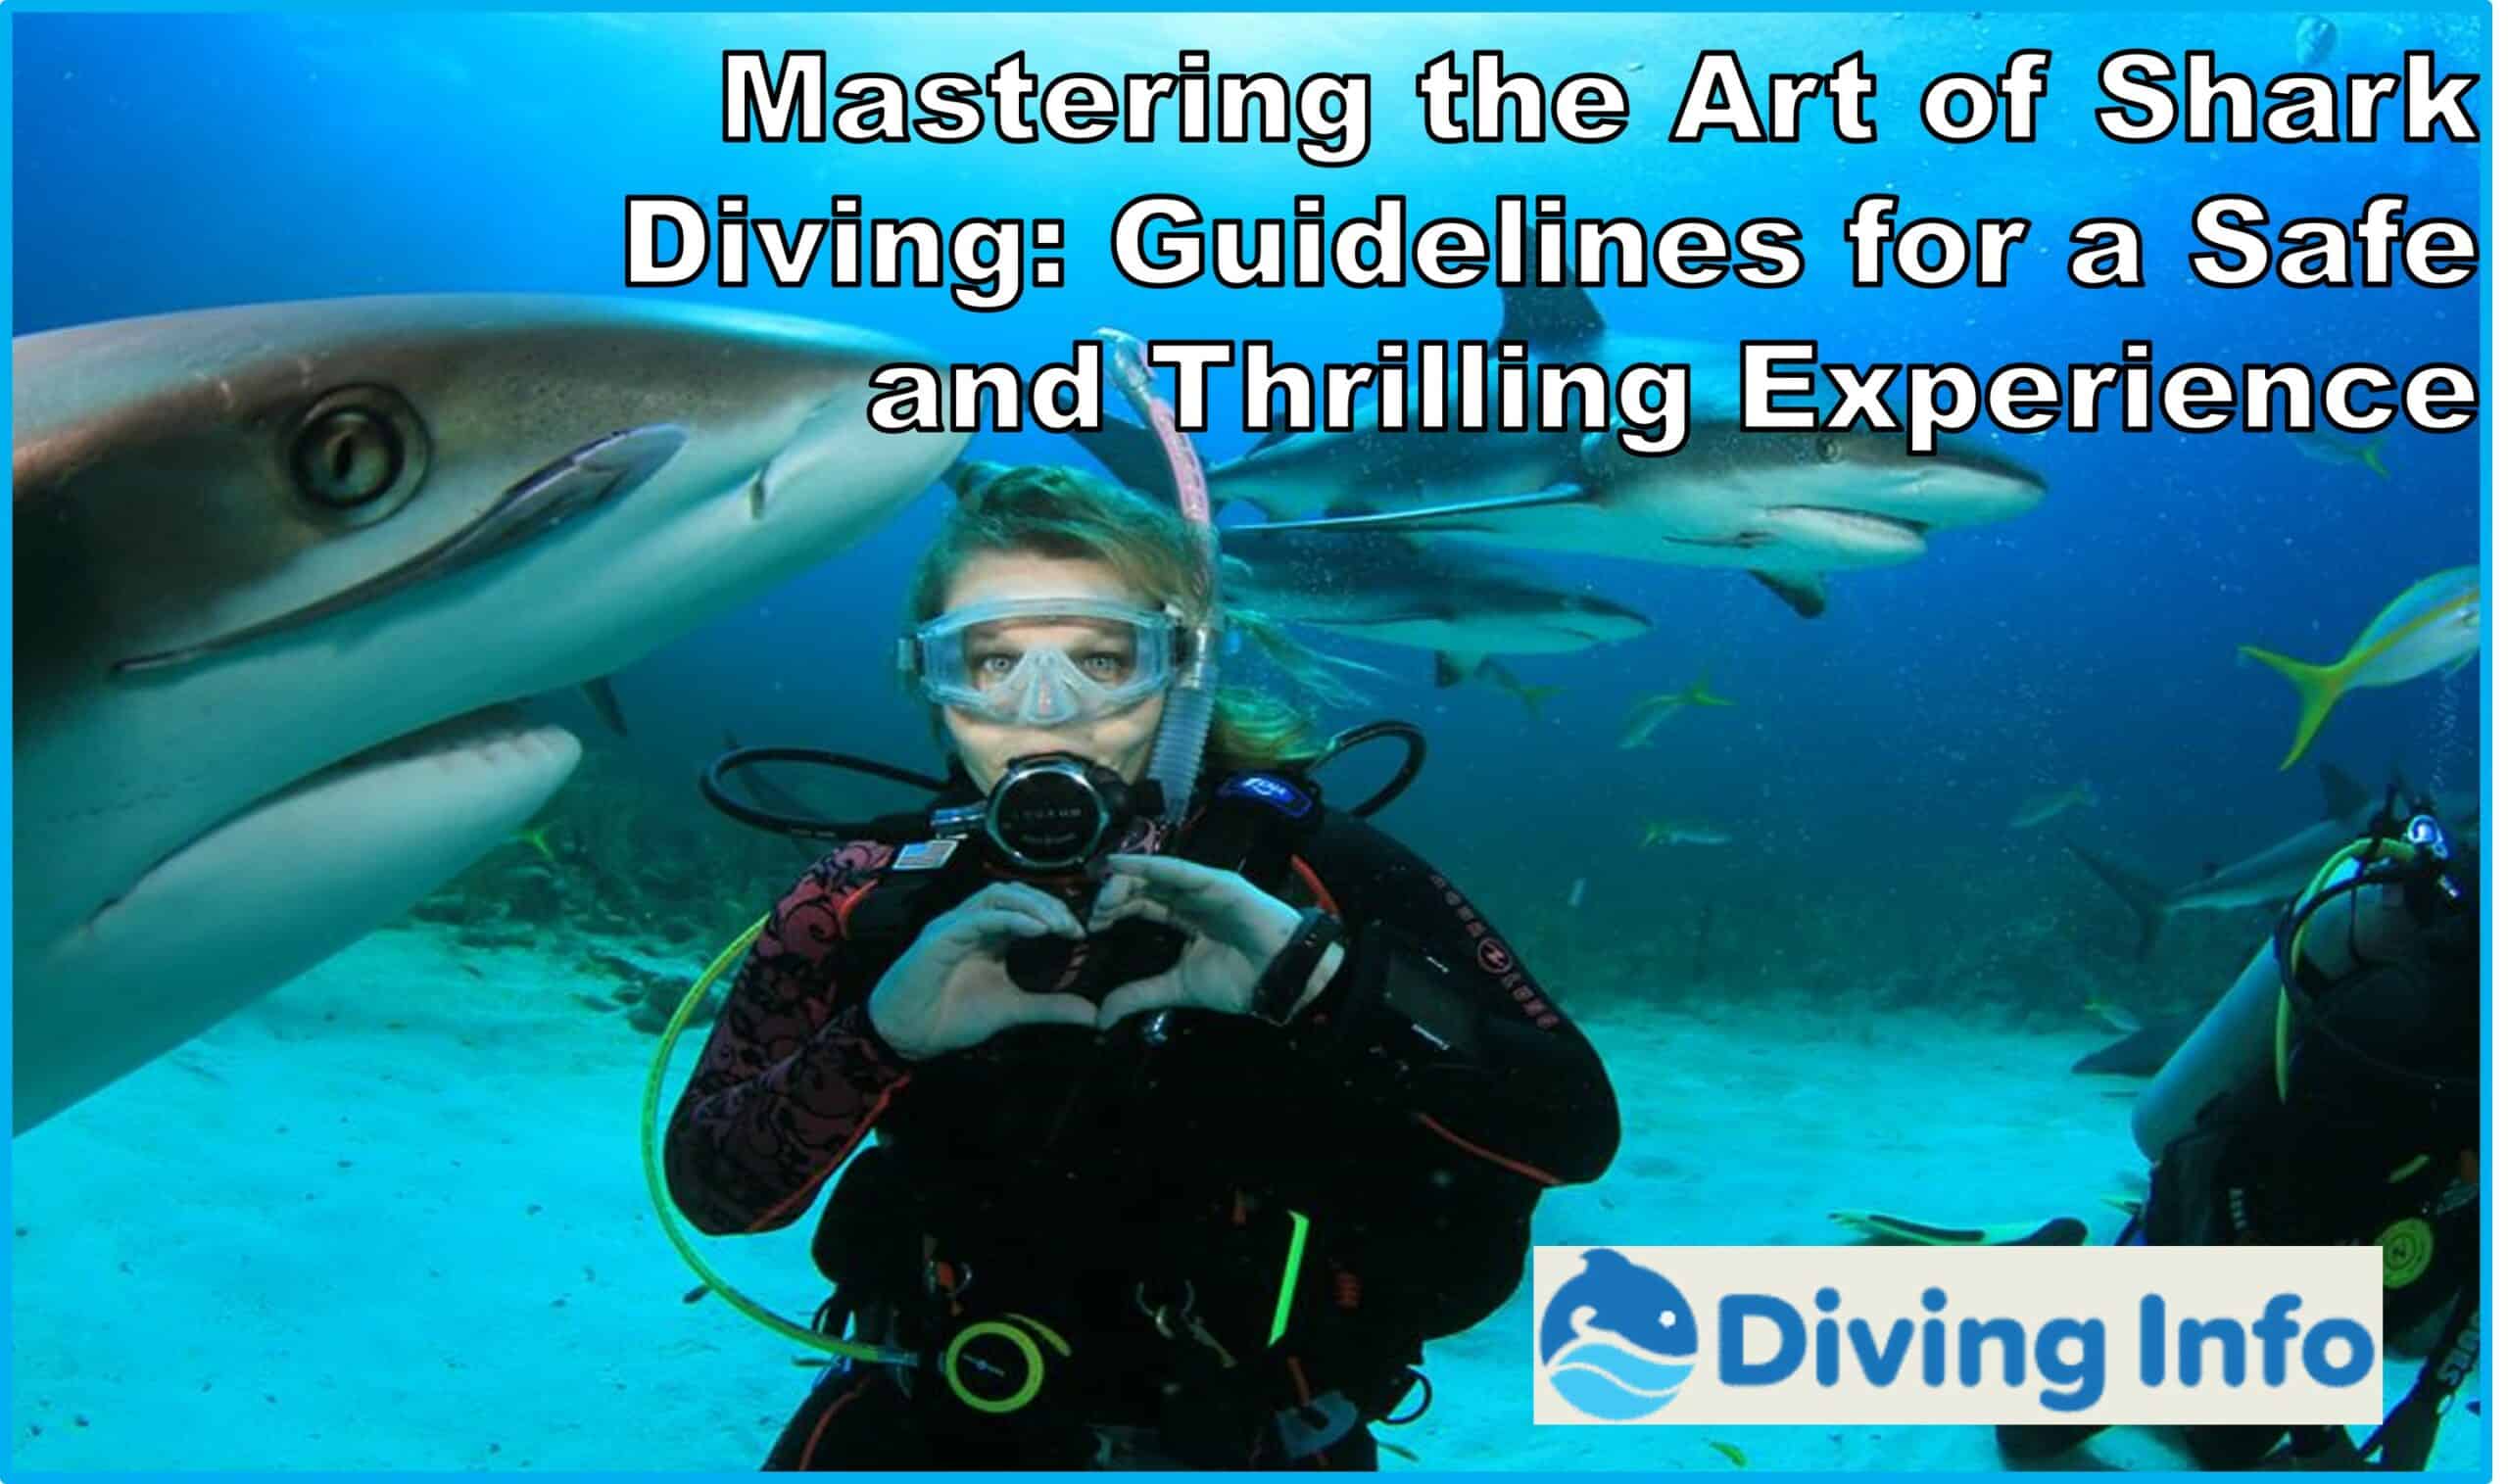 Mastering the Art of Shark Diving Guidelines for a Safe and Thrilling Experience